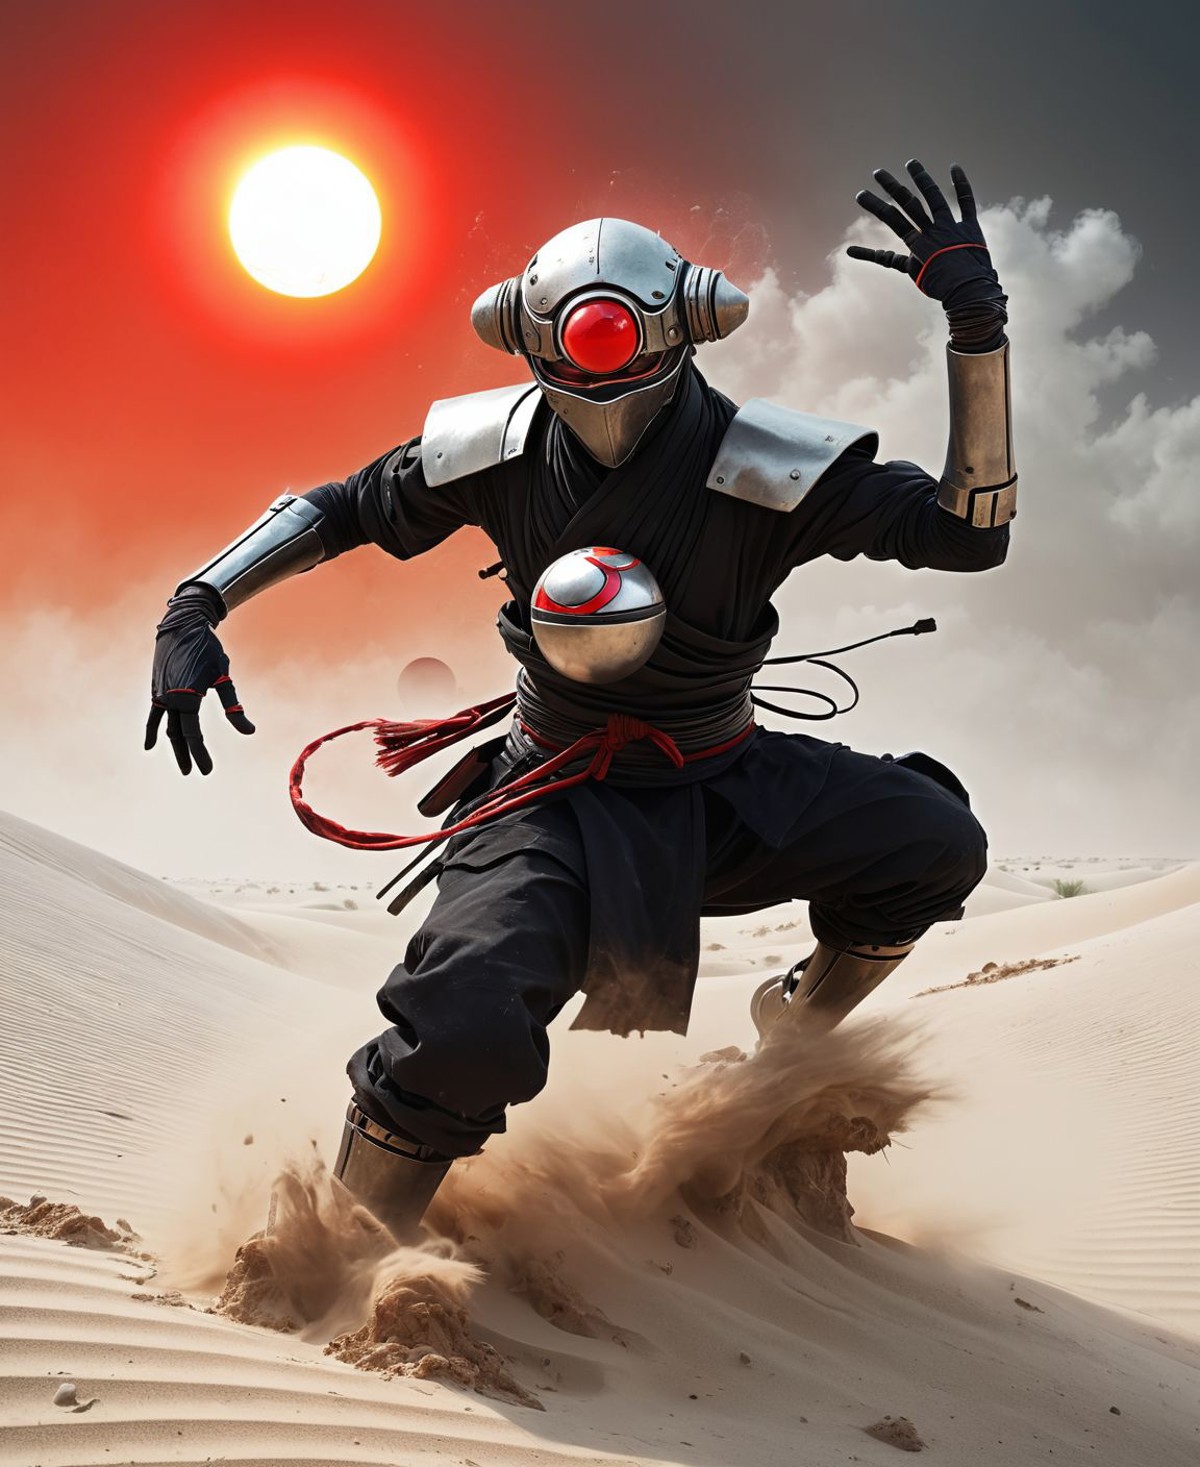 Capture the essence of a weathered, worn-out cyborg ninja amidst a swirling dust and electricity storm. Bent forward, obsc...